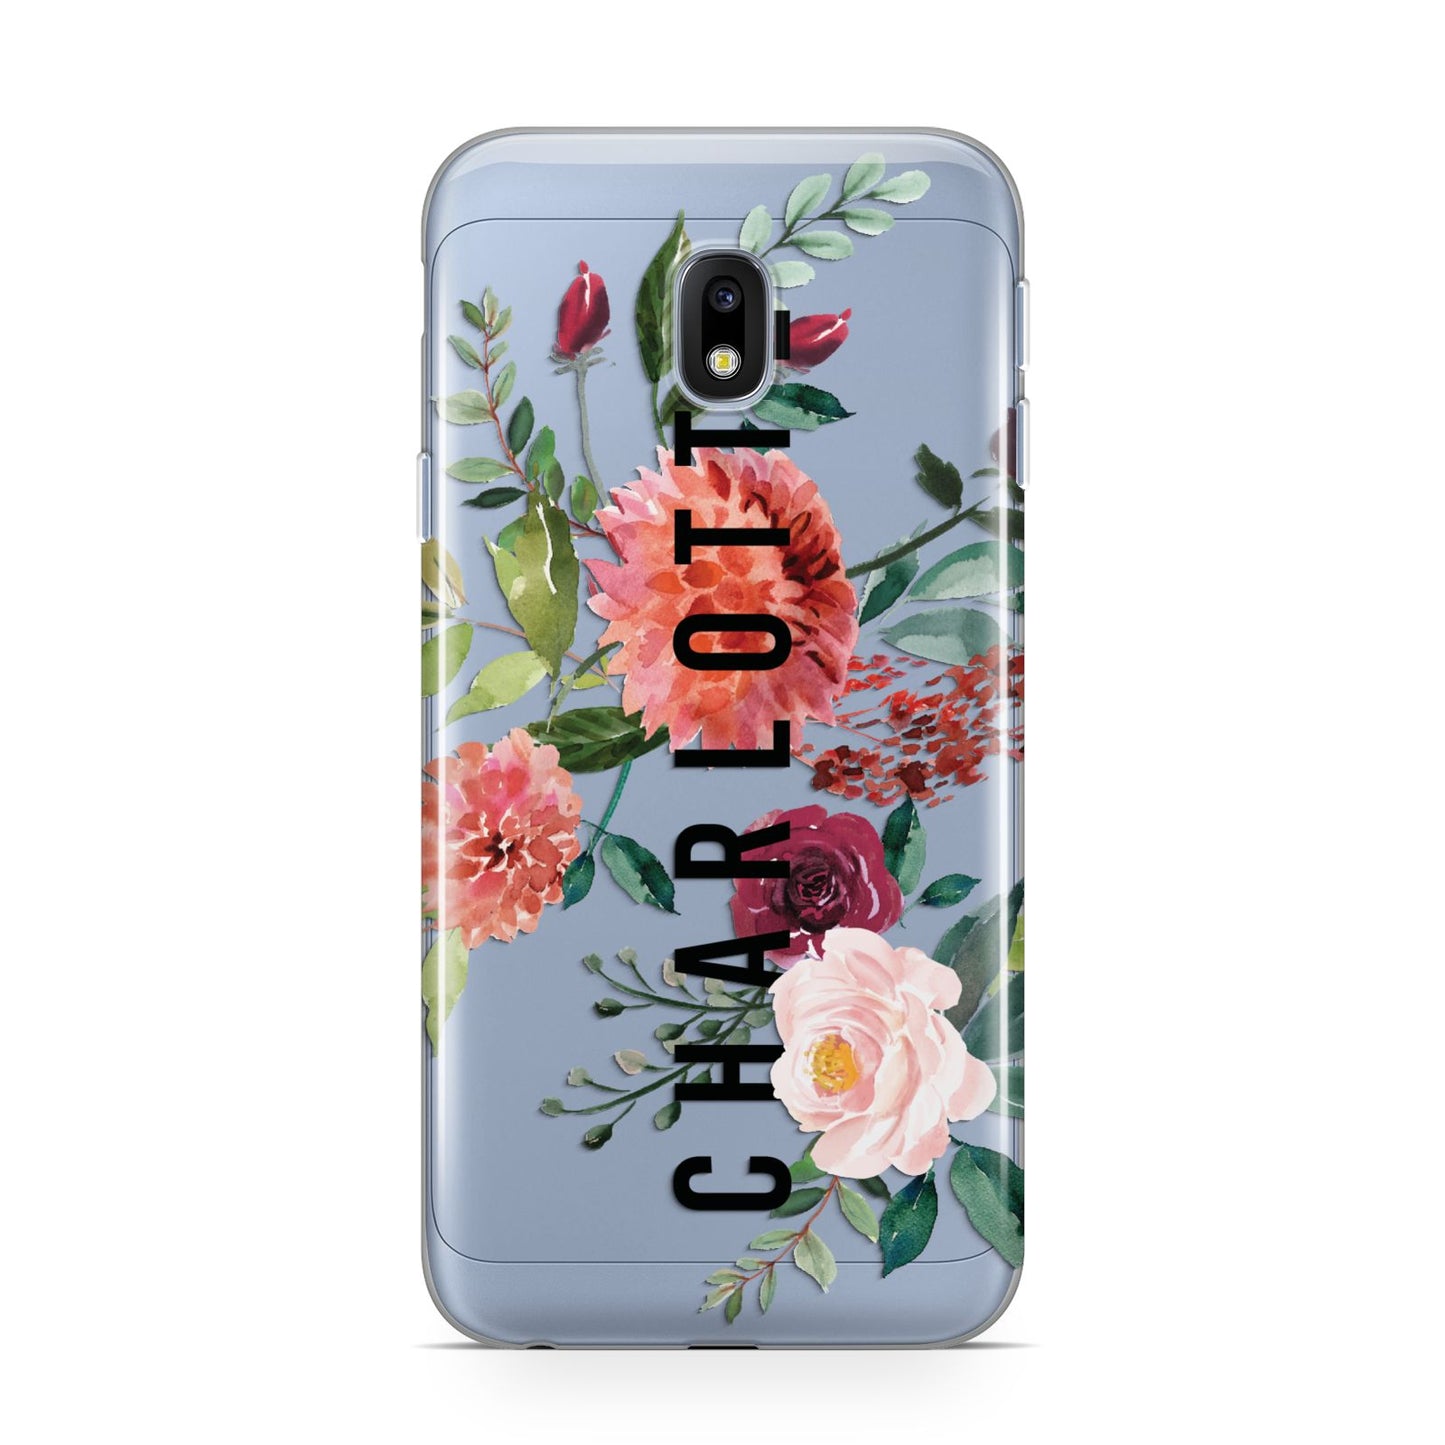 Personalised Side Name Clear Floral Samsung Galaxy J3 2017 Case